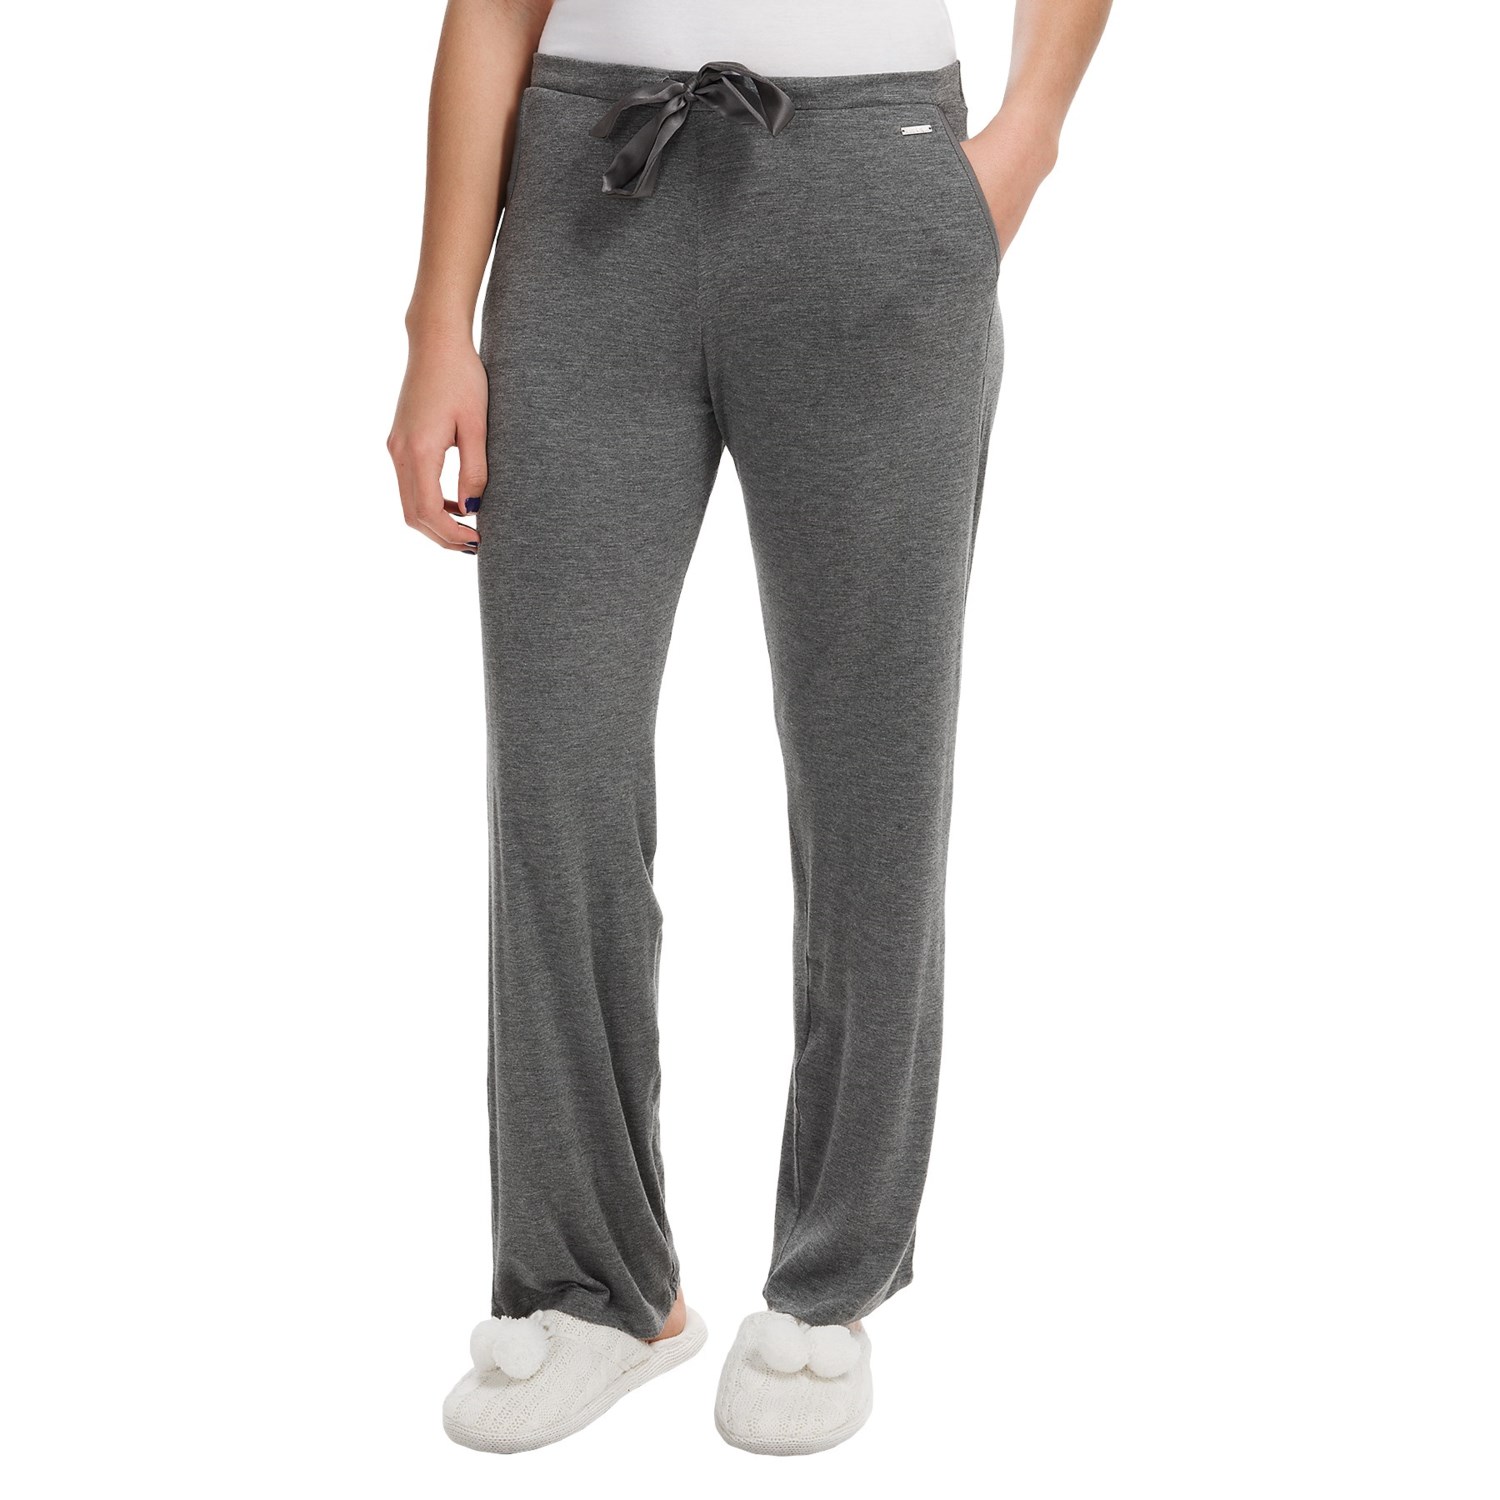 Nicole Miller Lightweight Lounge Pants (For Women) - Save 76%